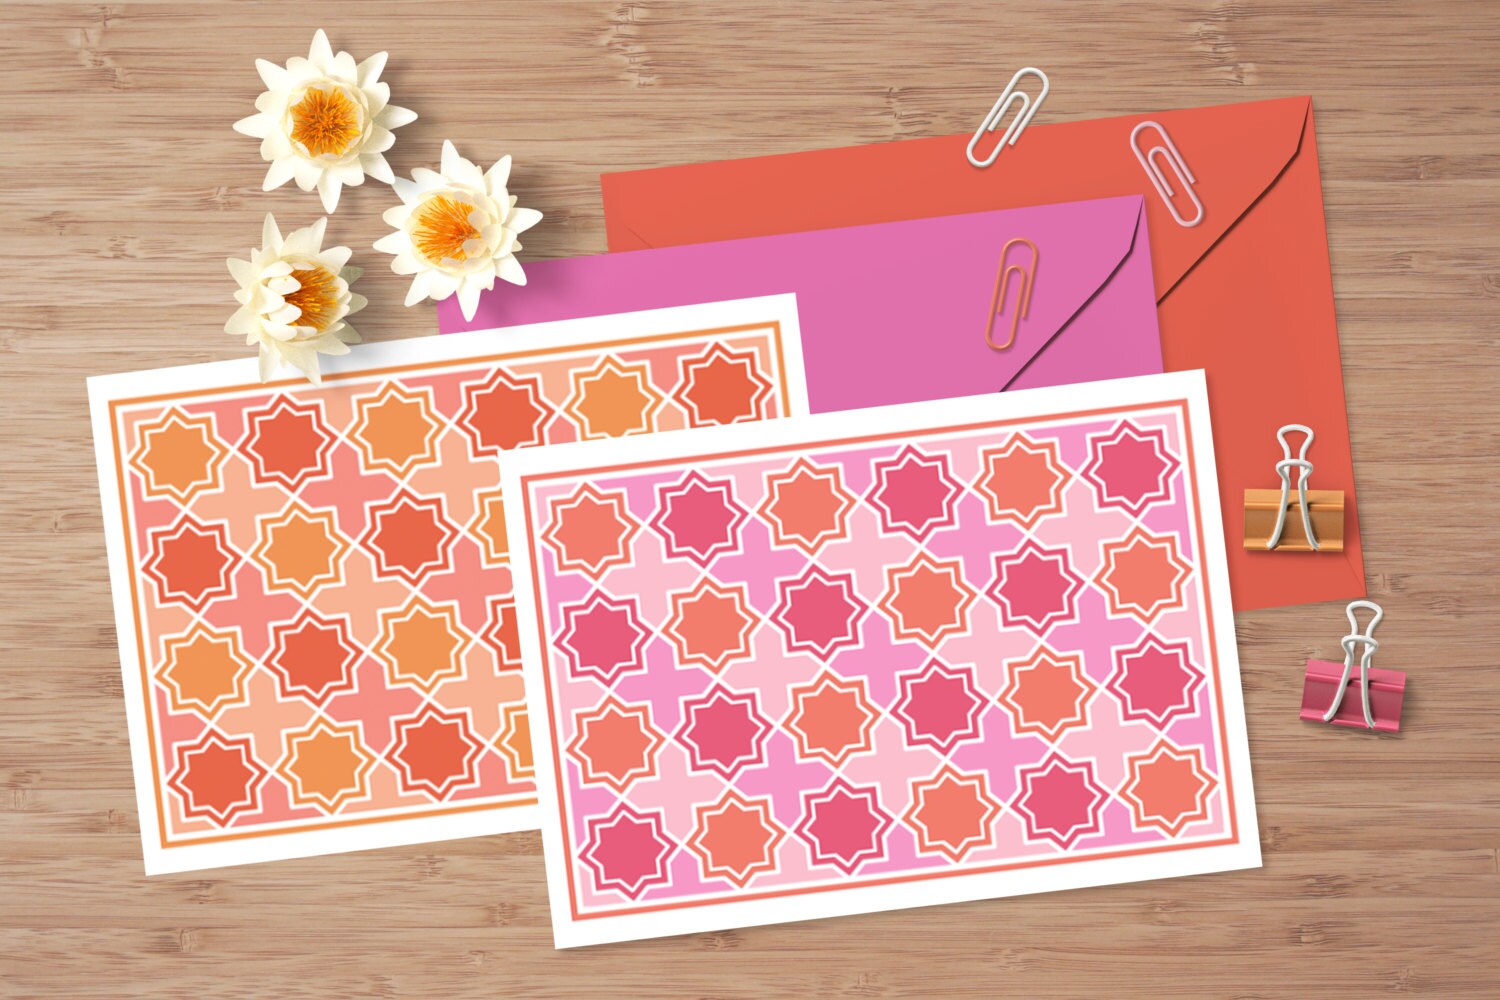 Printable Greeting Cards // TWO Blank Cards with Geometric